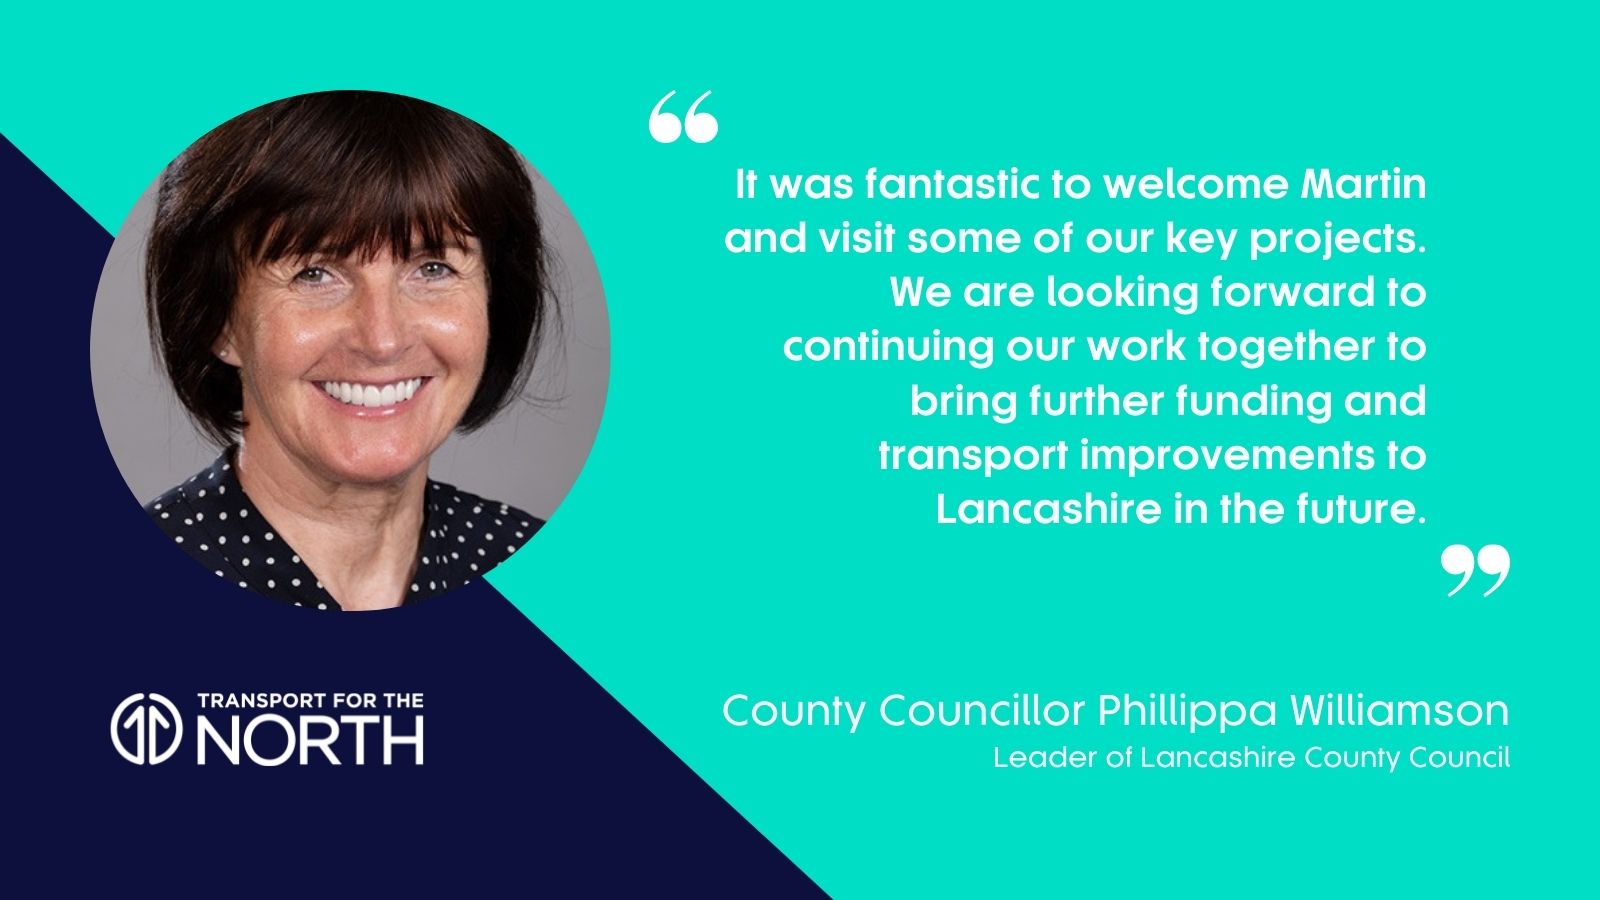 County Councillor Phillippa Williamson comments on Transport for the North visit